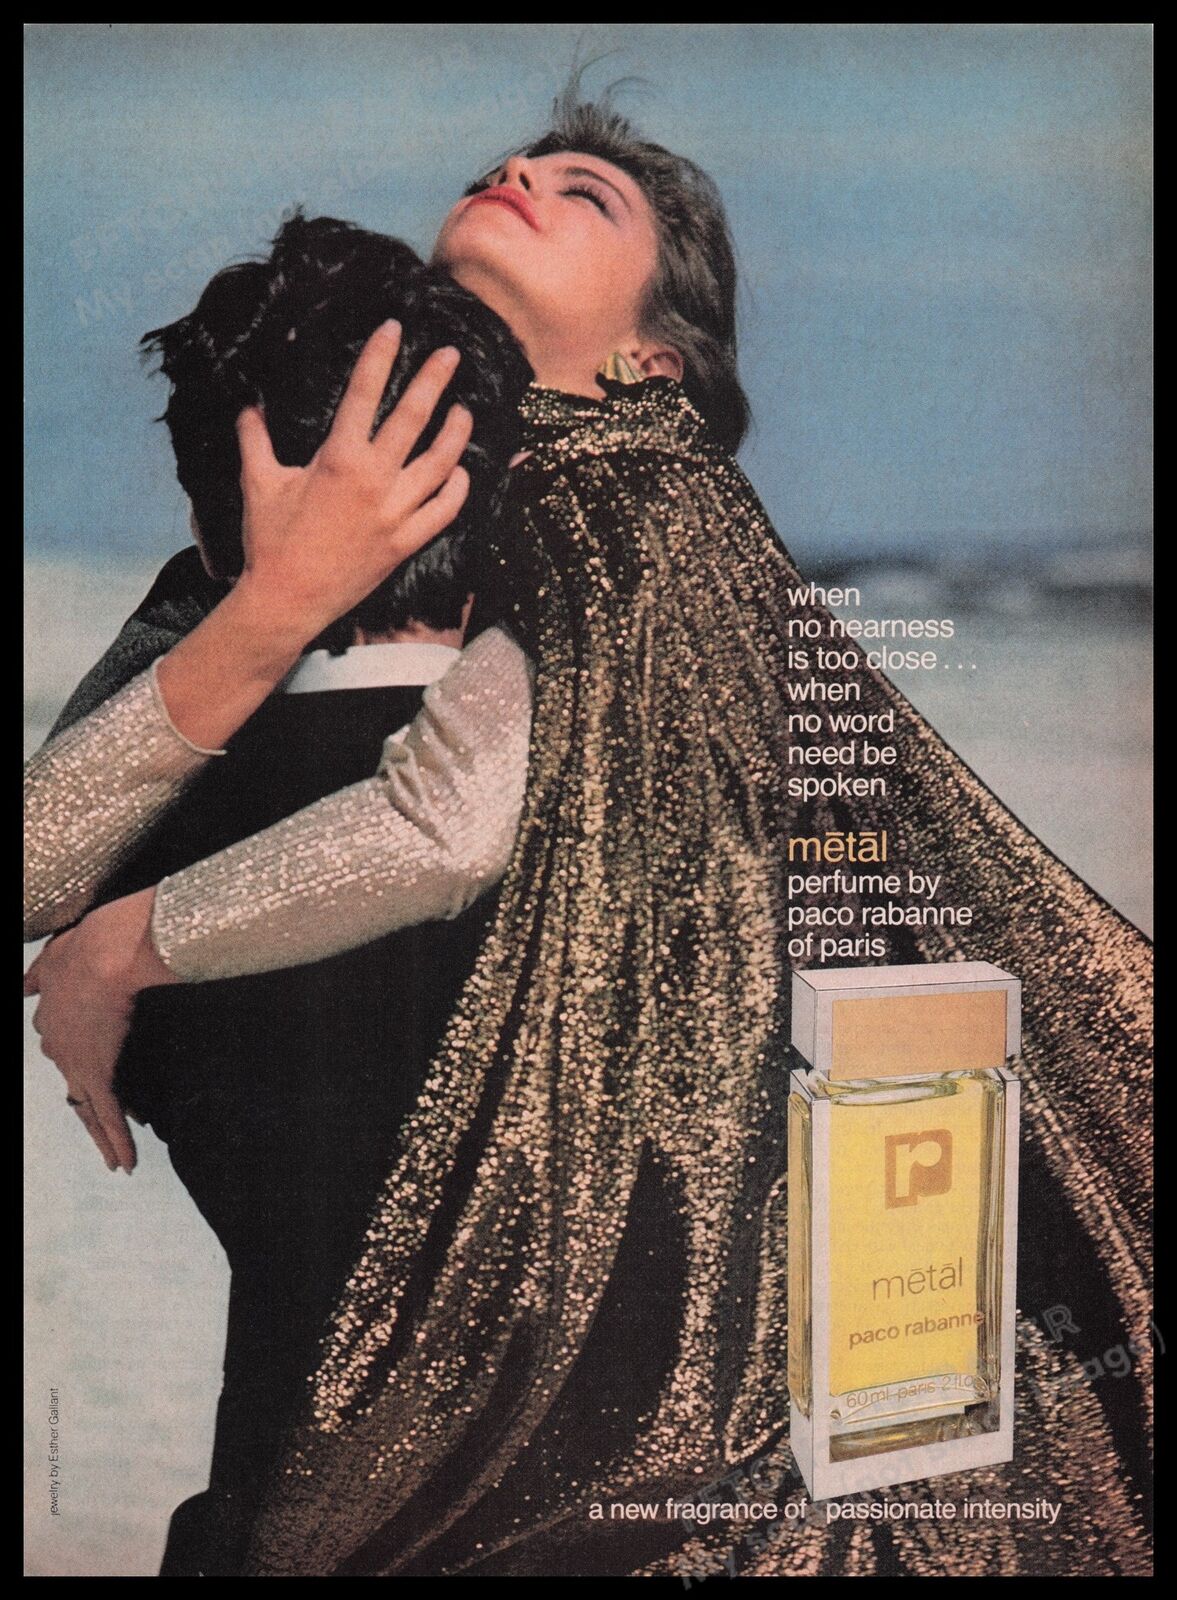 Metal Paco Rabanne Fragrance 1980s Print Advertisement Ad 1980 Embracing Couple